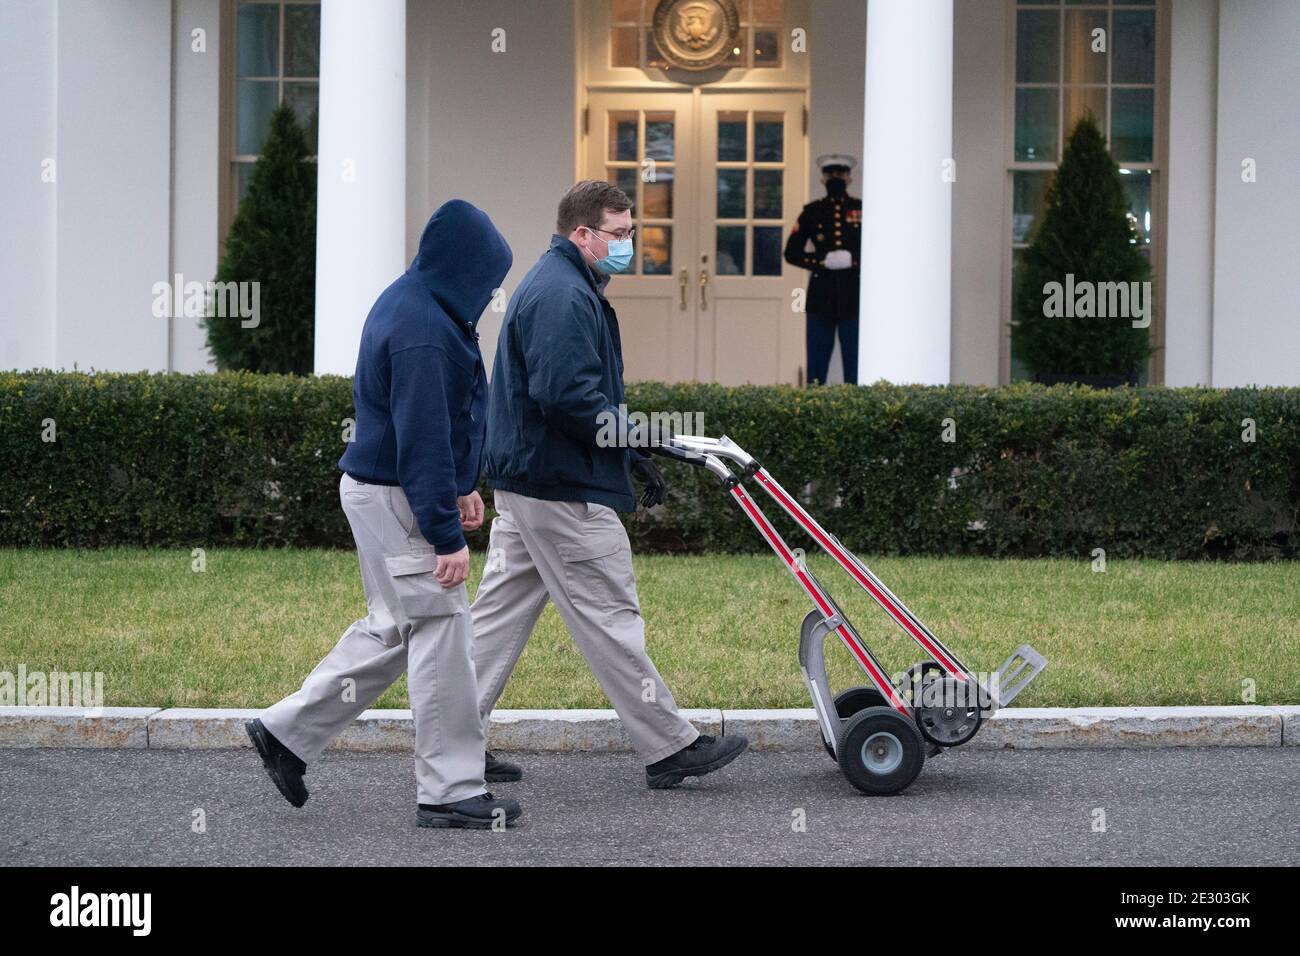 Workers with empty hand trucks pass the West Wing of the White House in Washington, DC on Friday, January 15, 2021. The guard outside the door in the background indicates United States President Donald J. Trump is in the Oval Office.Credit: Chris Kleponis/Pool via CNP | usage worldwide Stock Photo